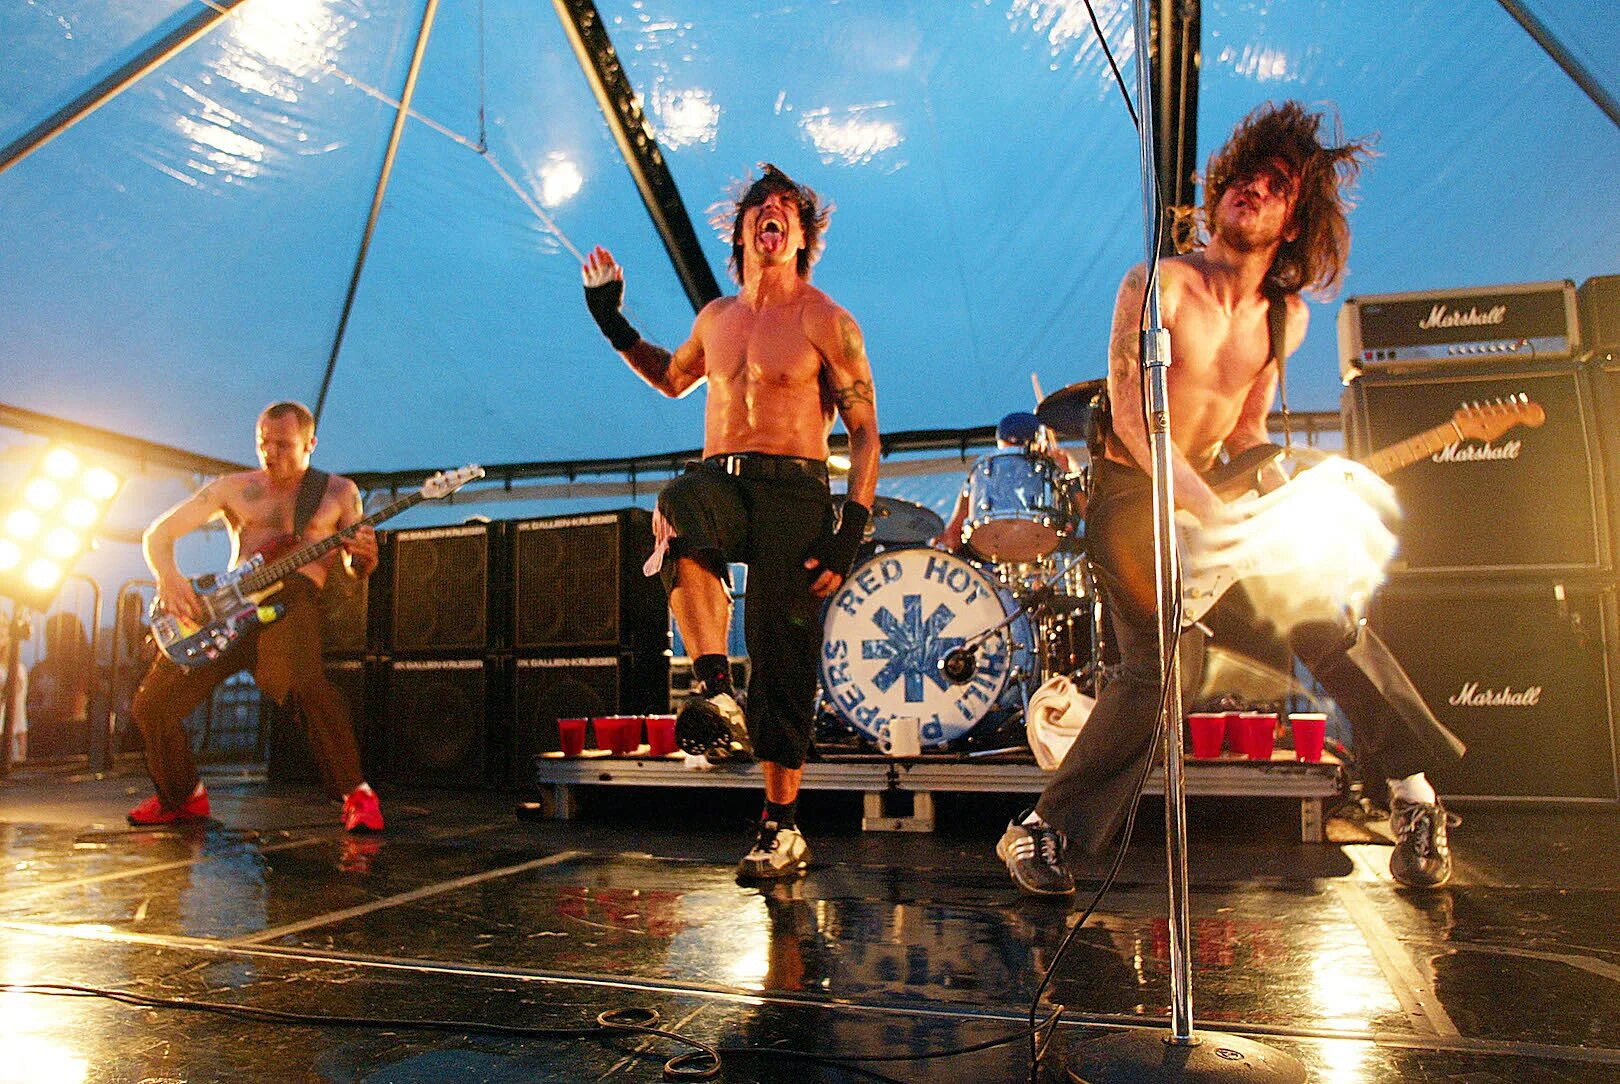 Red hot chili peppers википедия. RHCP 1989. Гитарист РХЧП. RHCP 1992. Red hot Chili Peppers.